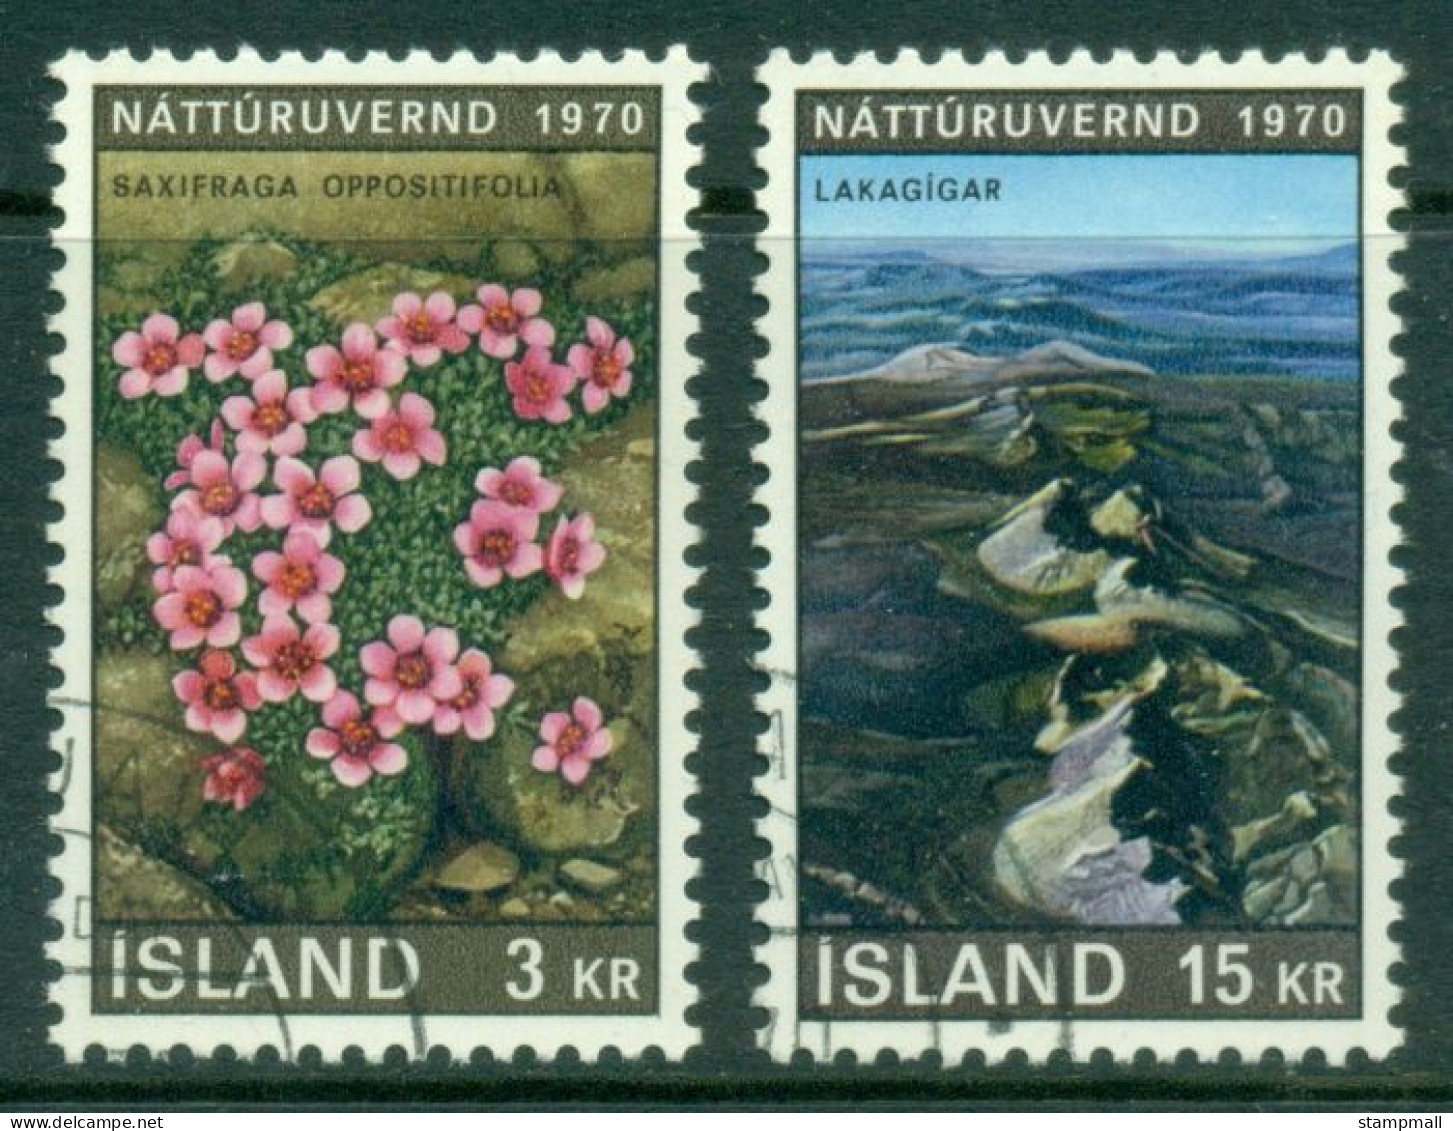 Iceland 1970 European Nature Conservation Year CTO - Used Stamps